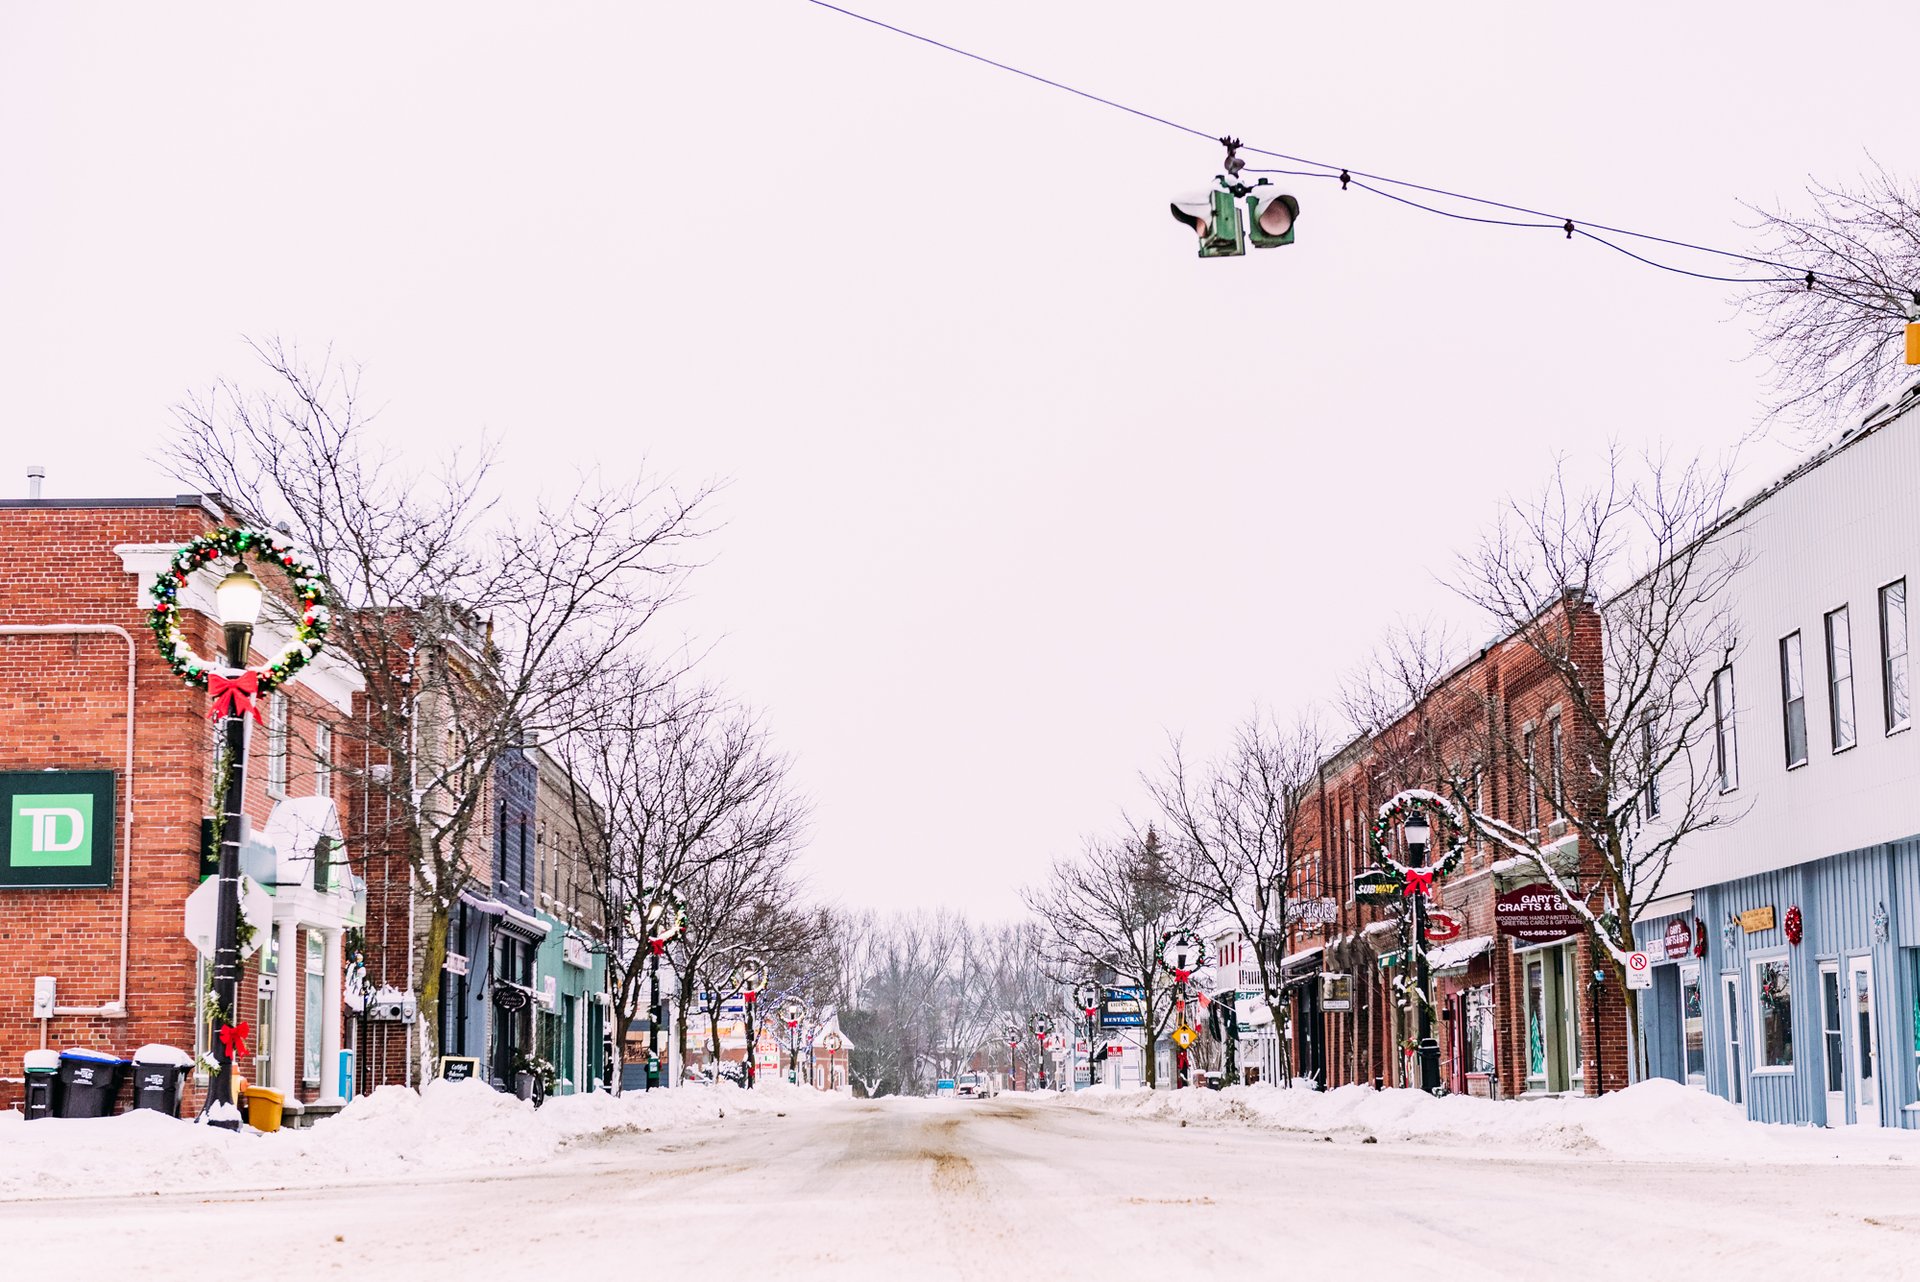 Downtown Coldwater in the winter with festive wreath decor